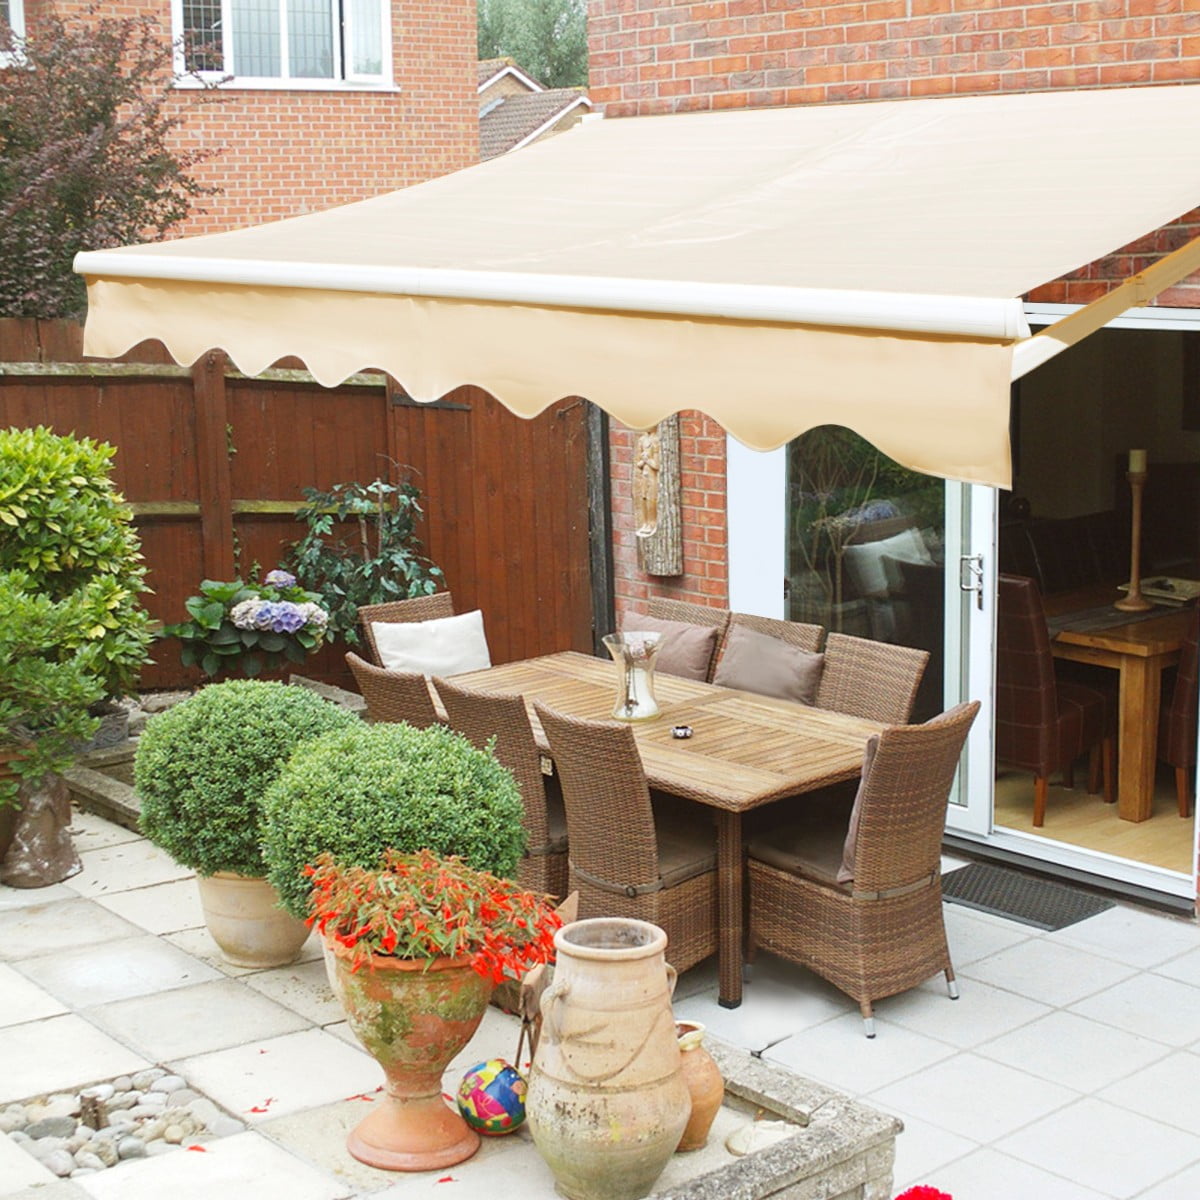 Sun Protection LZQ Folding Manual Awning DIY Patio Retractable Awning with Crank Handle Brown Anti-UV and Waterproof Polyester Restaurant Beige for Courtyard Balcony 360 x 300 cm